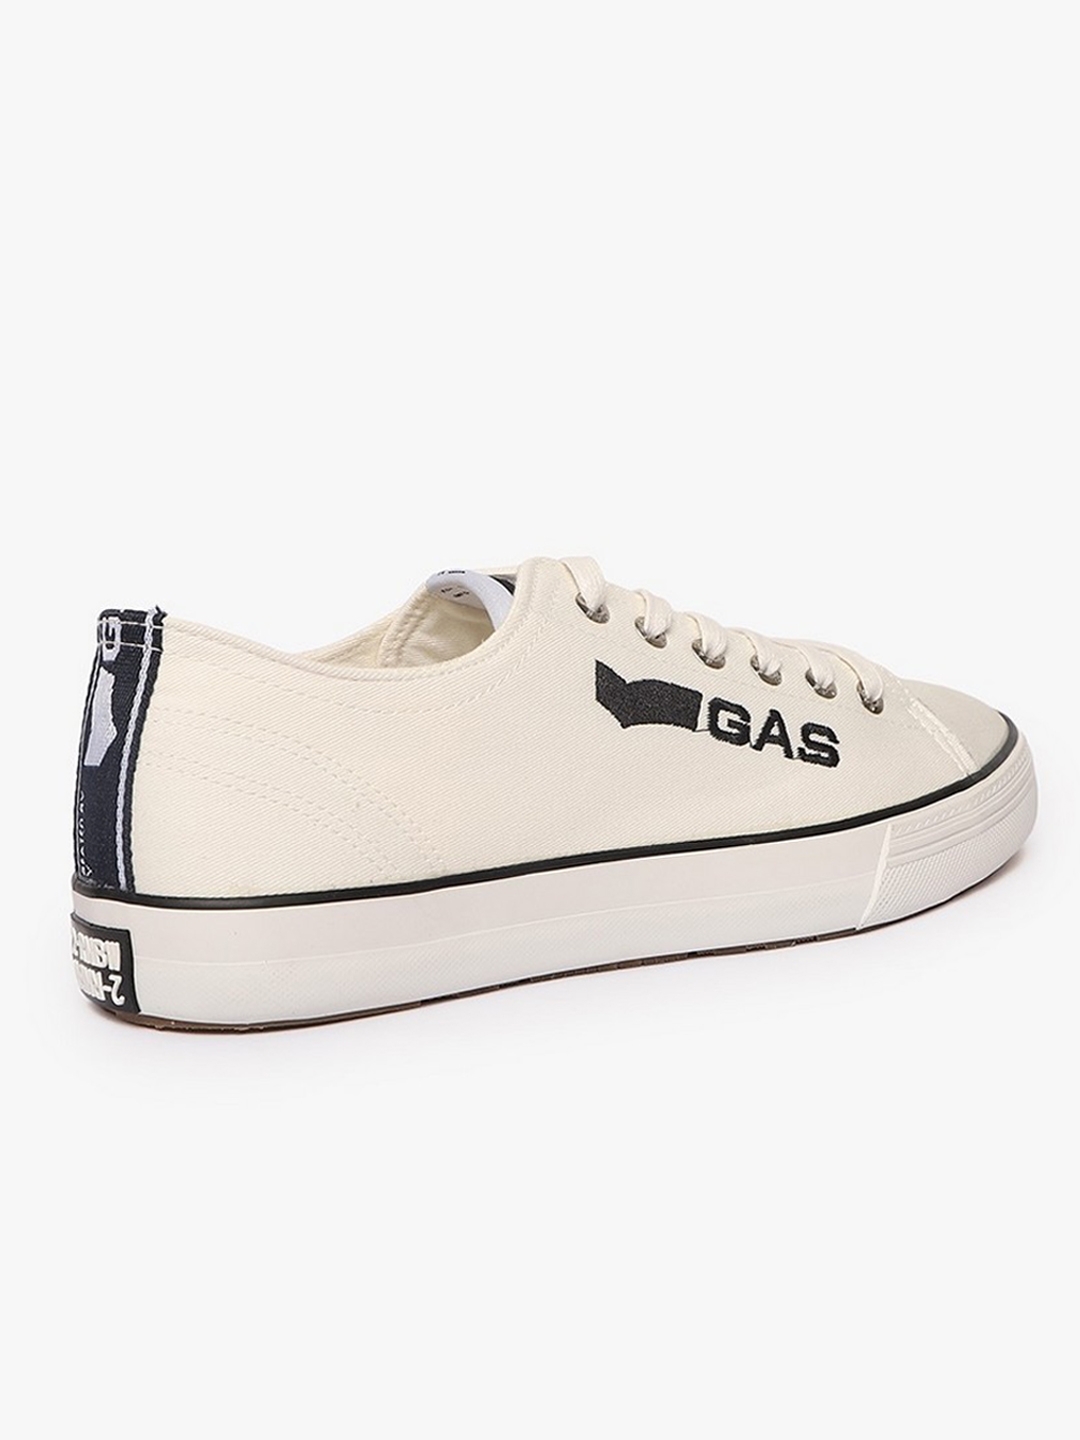 Canvas Lace-Up Casual Shoes with Embroidered Branding